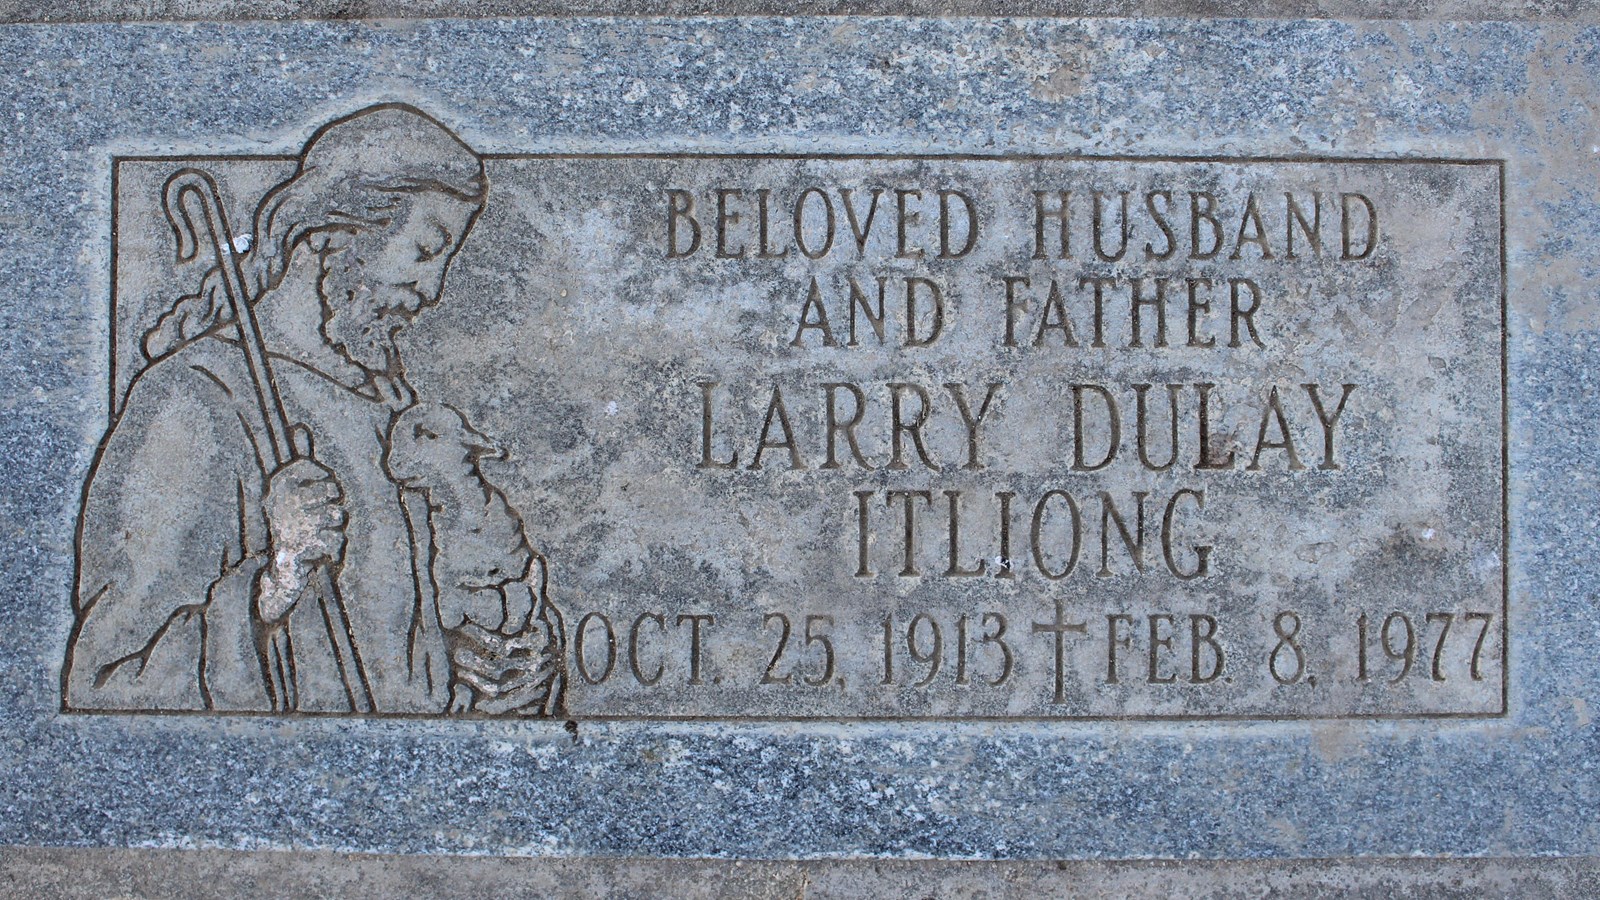 A gray gravestone for Larry Dulay Itliong features an image of Jesus cradling a lamb.